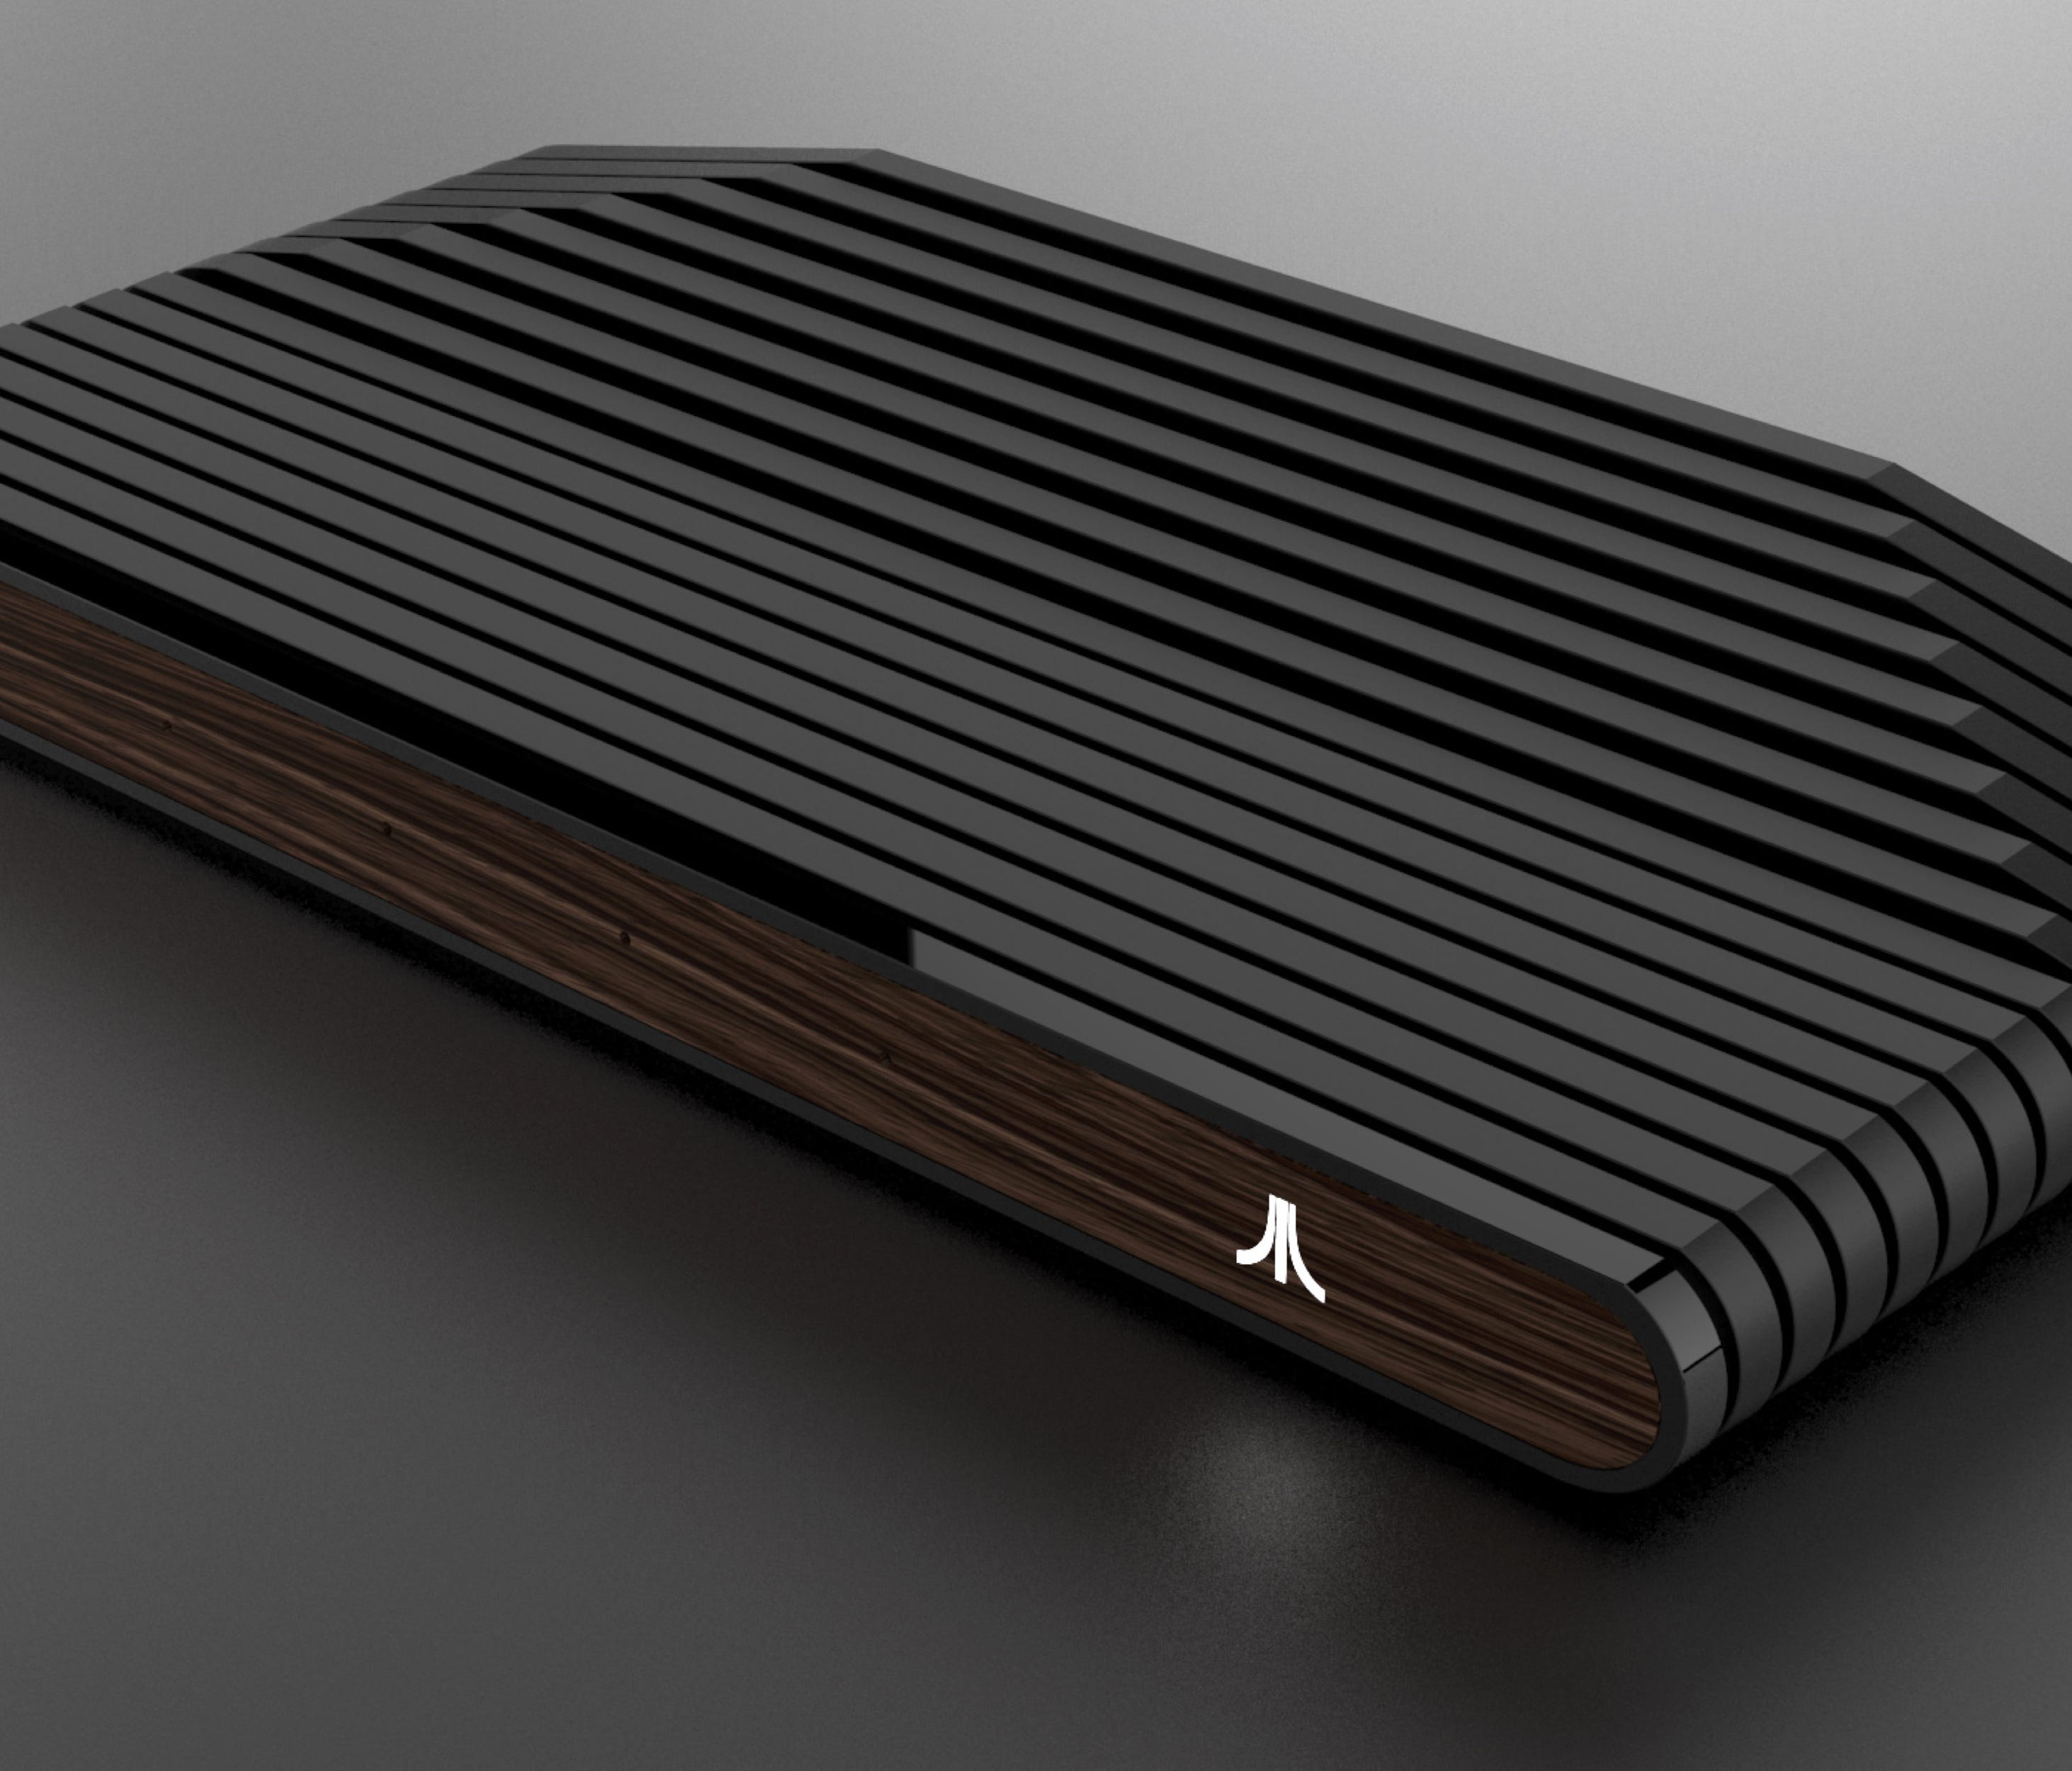 The Ataribox is bringing back the wood paneling that made the Atari 2600 a classic.